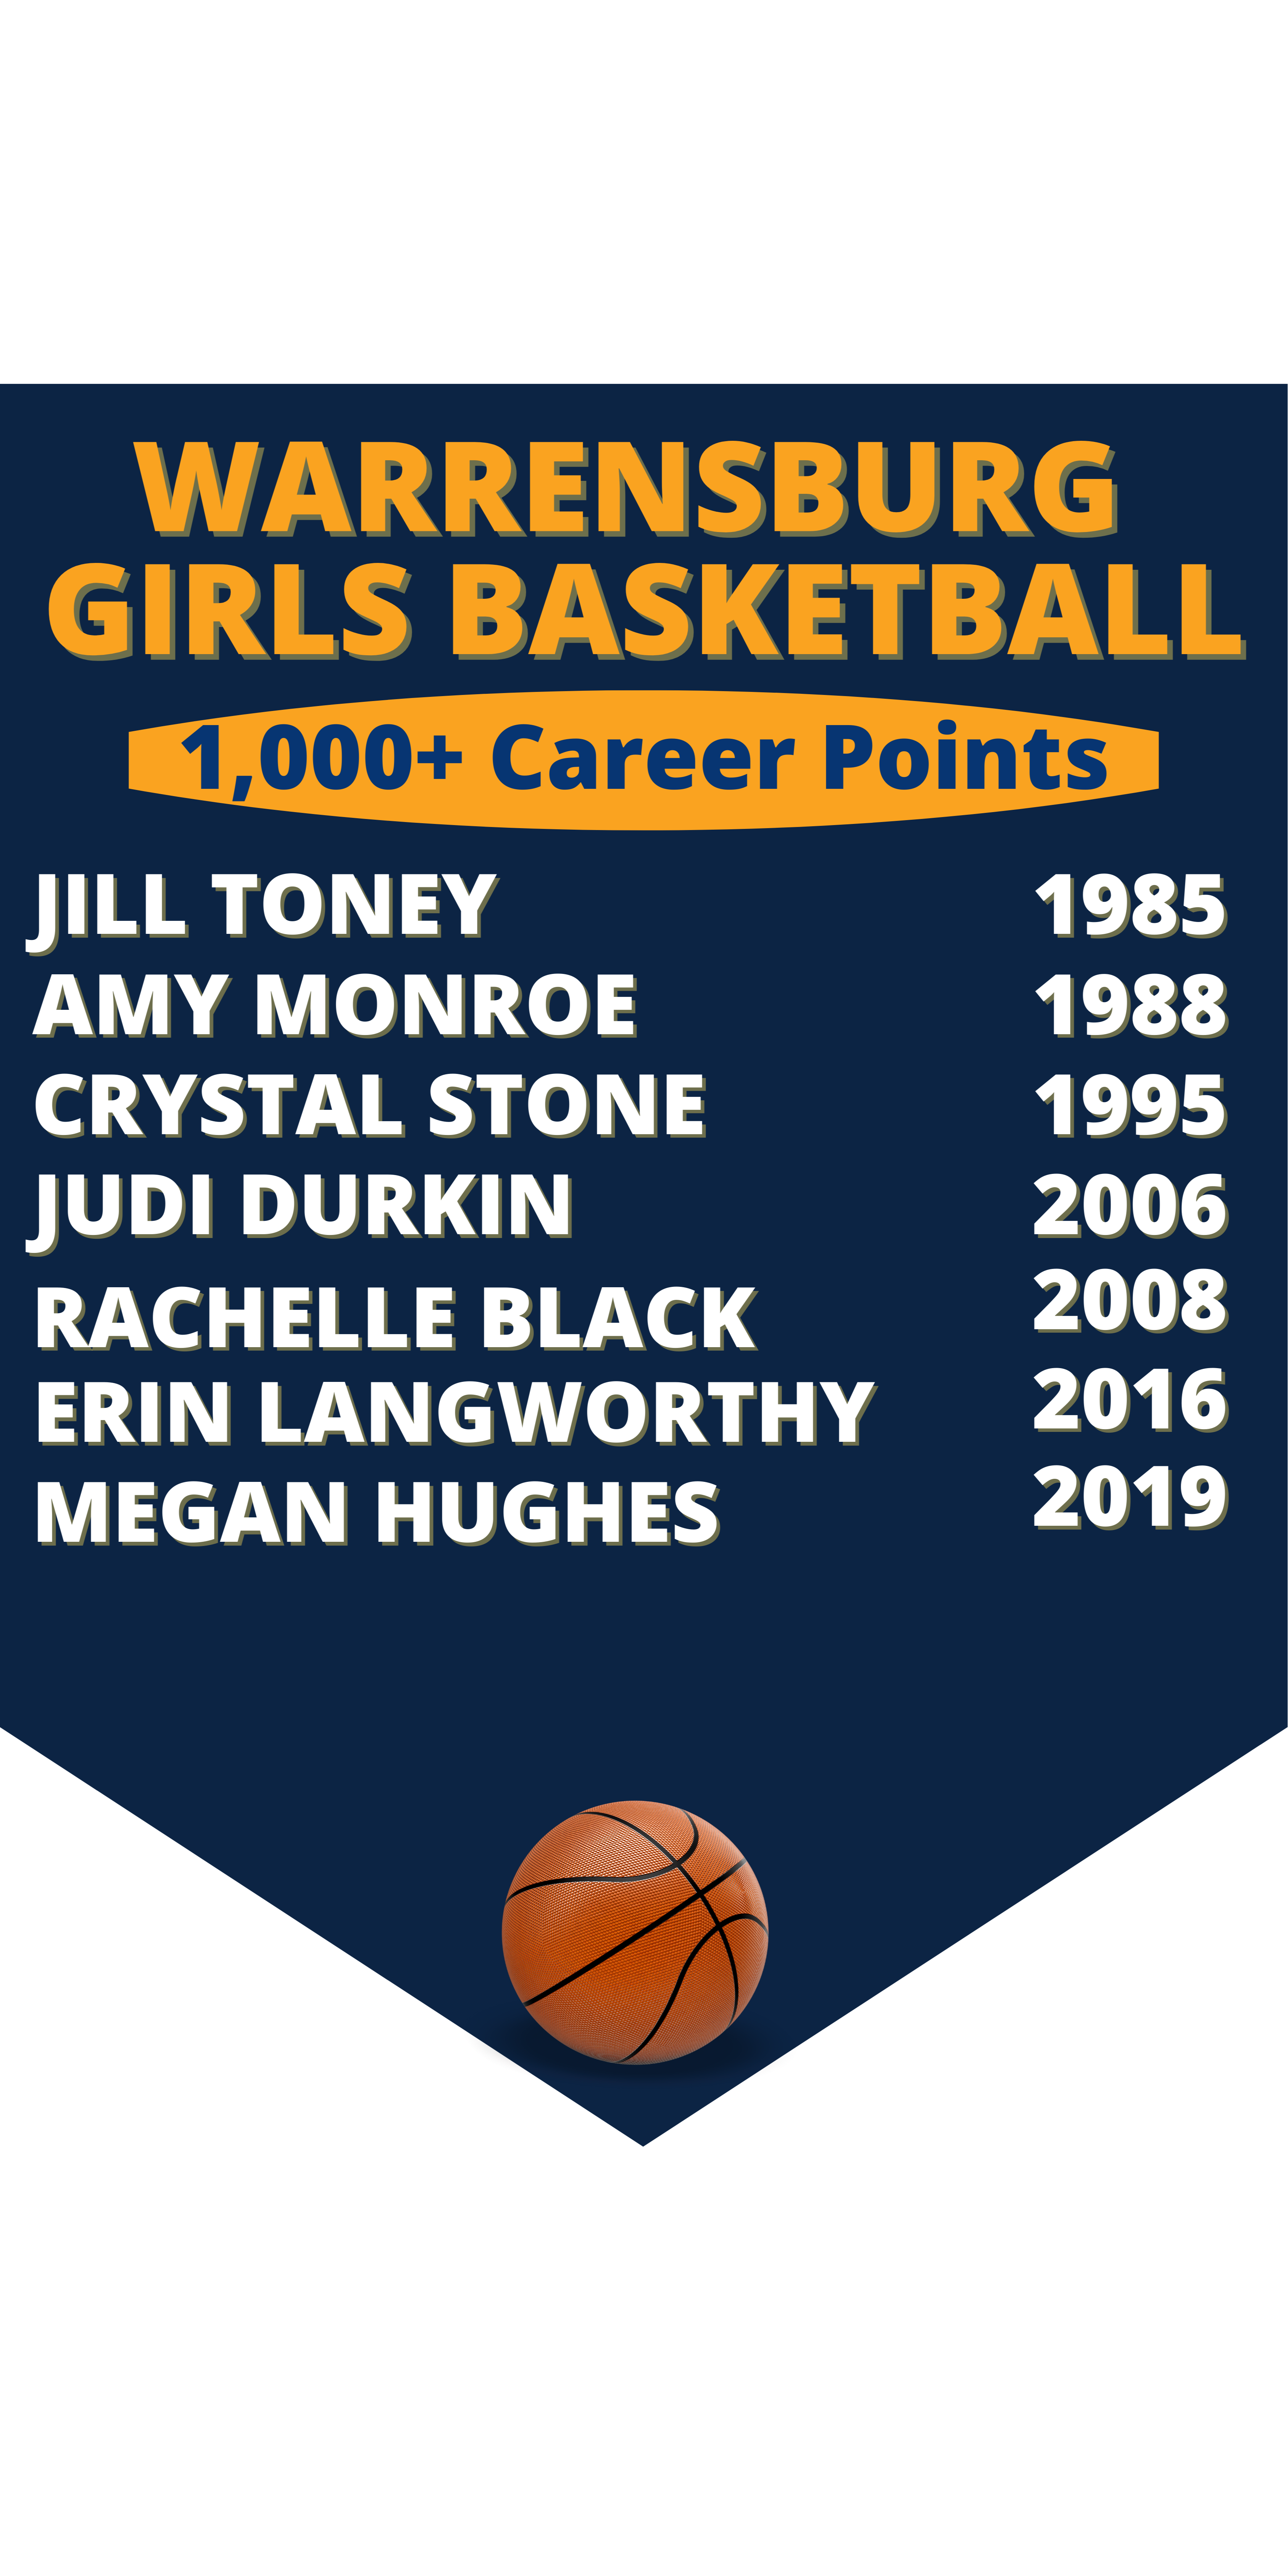 career points